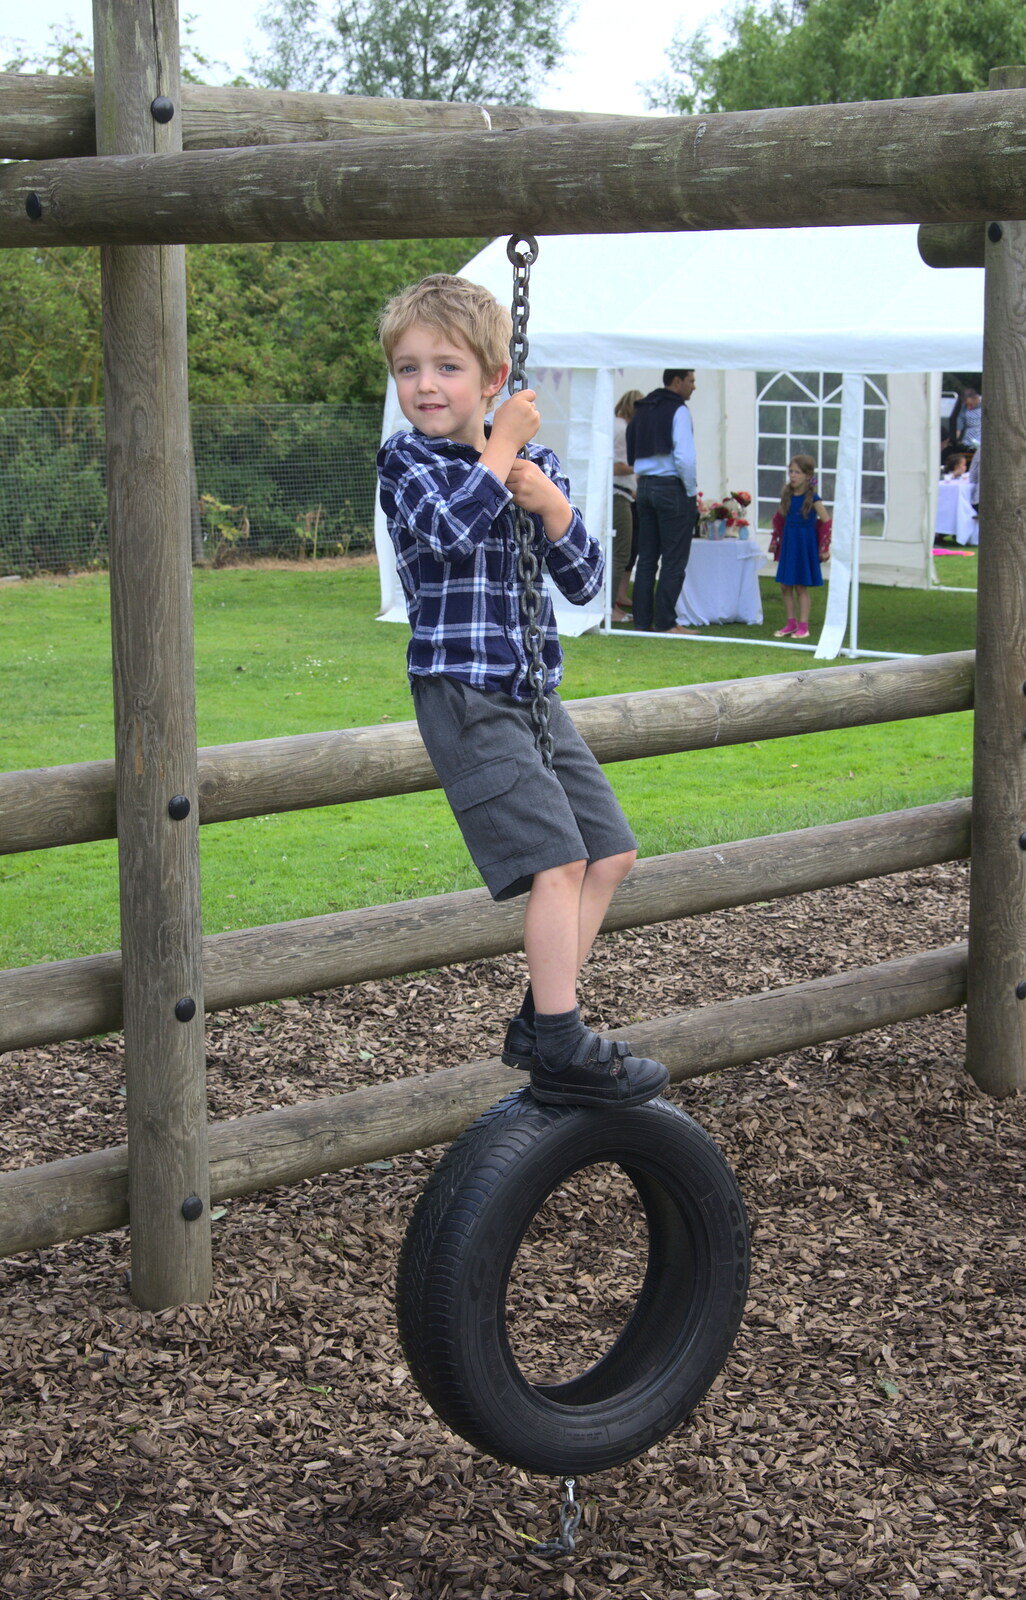 Fred swings about on a tyre from St. Peter and St. Paul's School Summer Fete, Eye, Suffolk - 12th July 2014